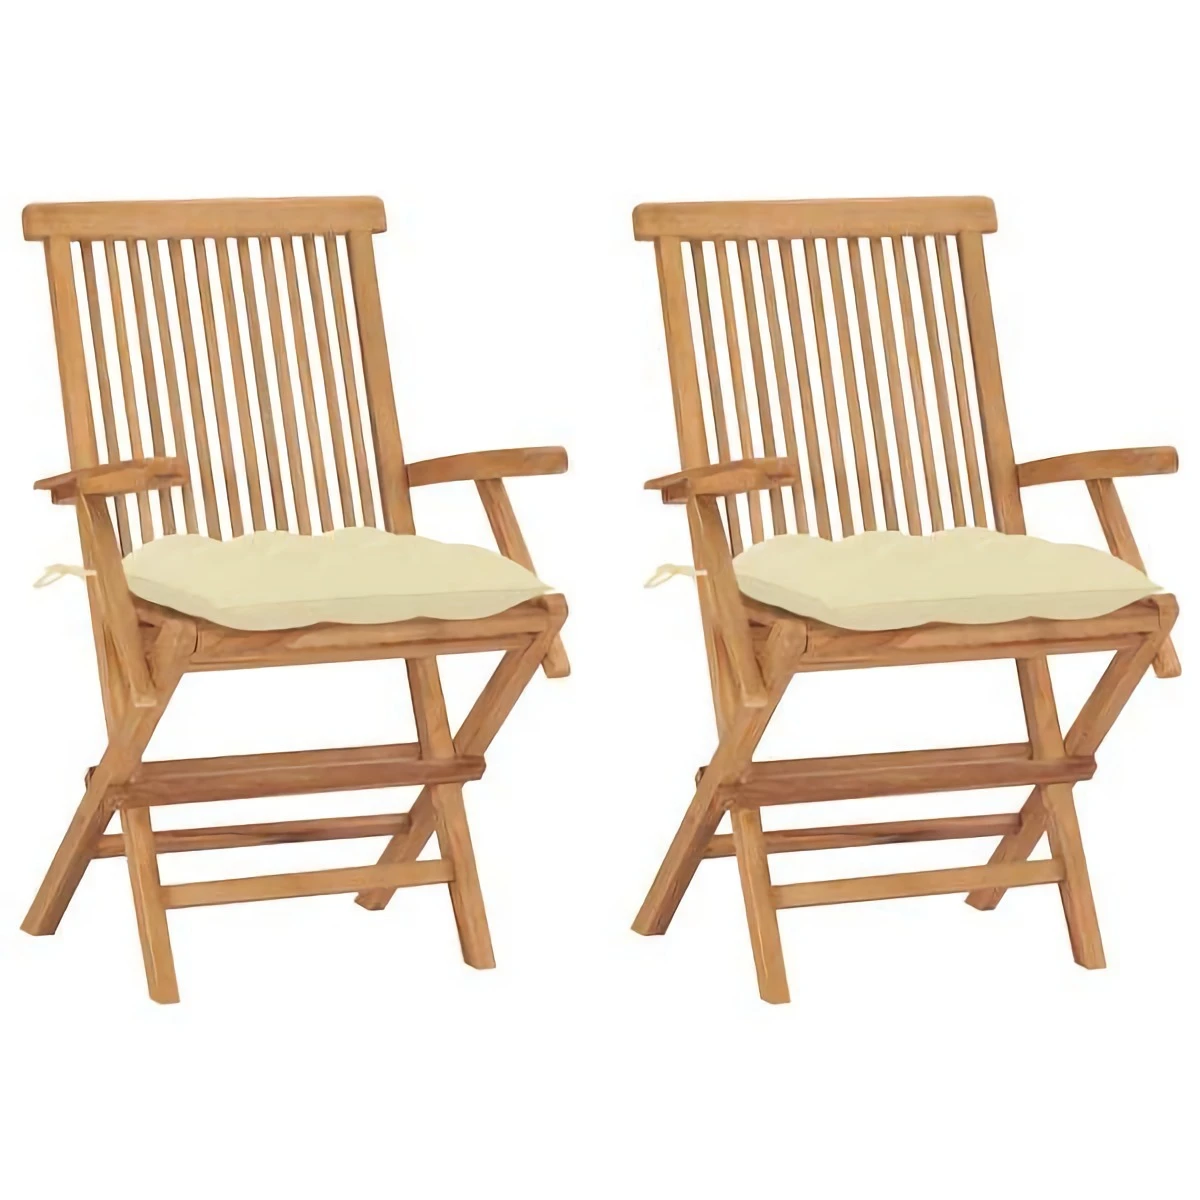 two wooden chairs for garden